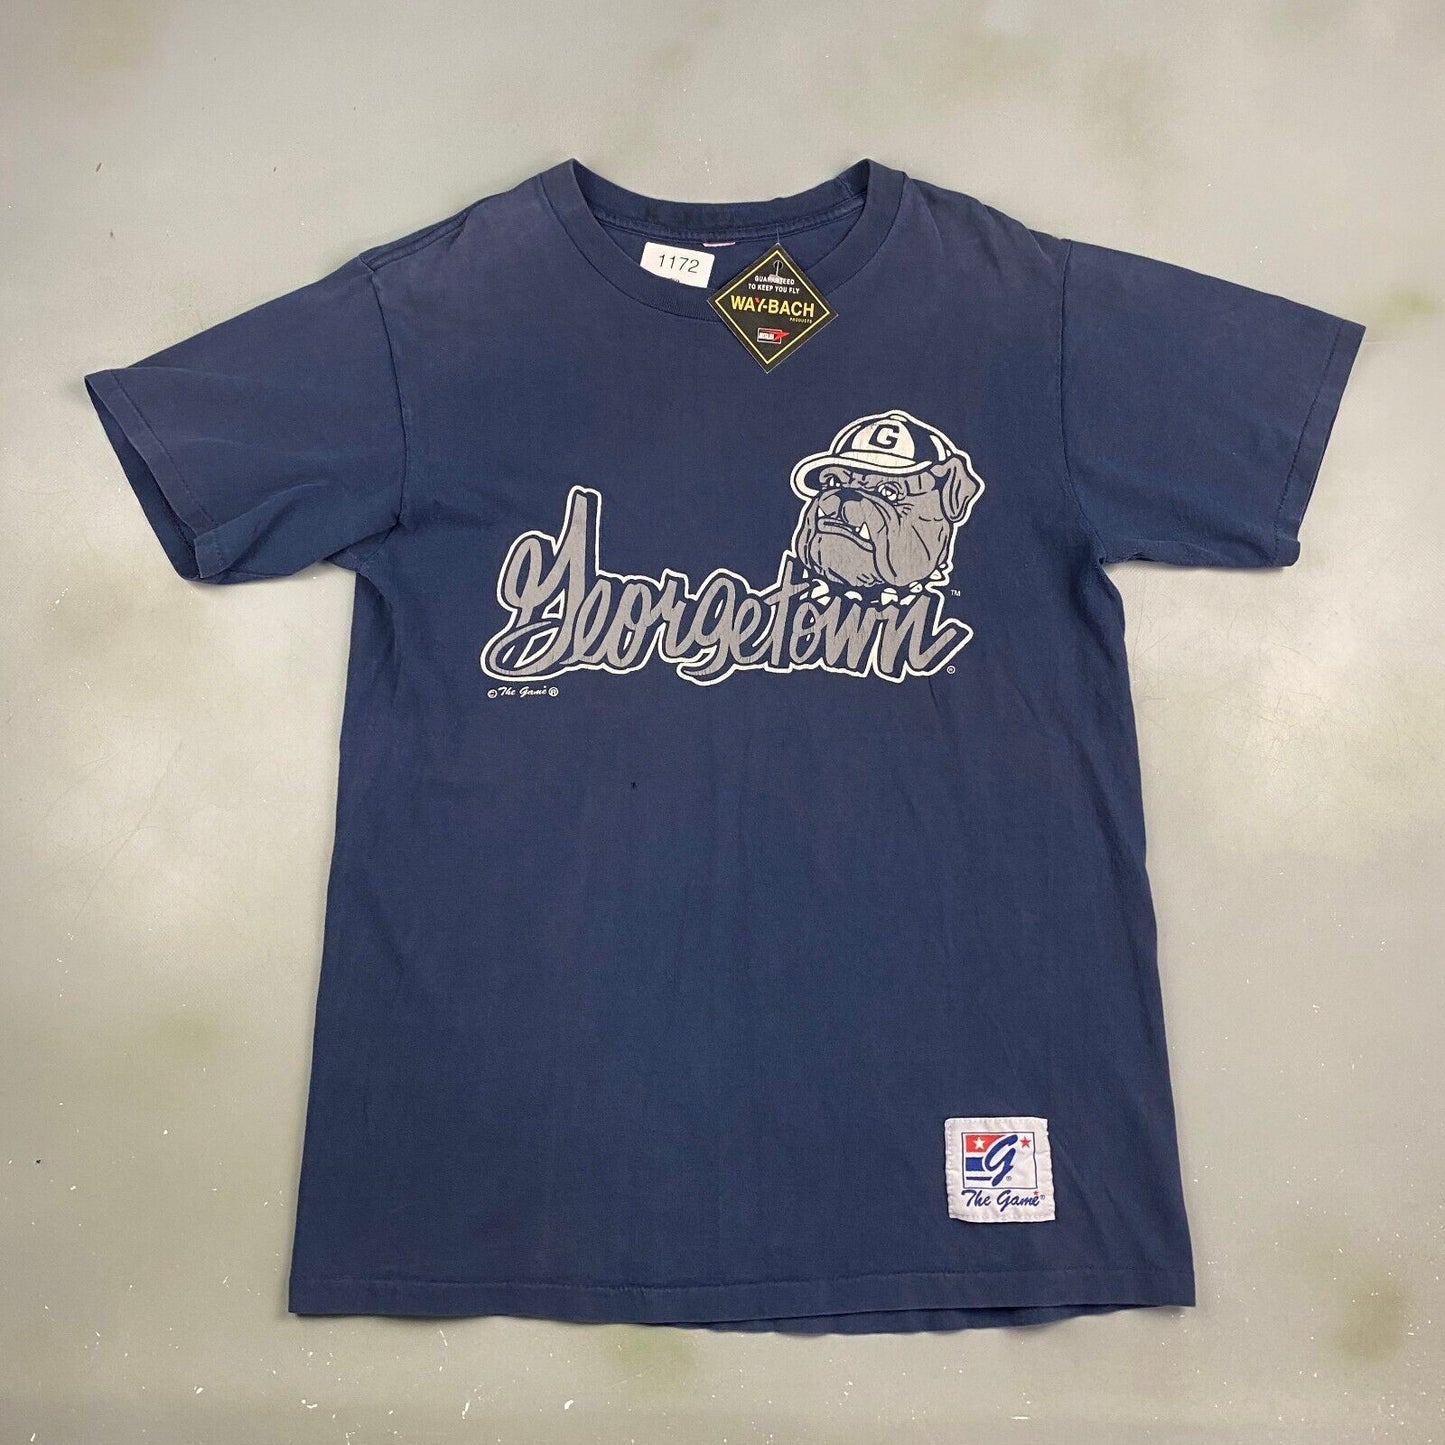 VINTAGE 90s The Game Georgetown Hoyas Navy T-Shirt sz Large Adult